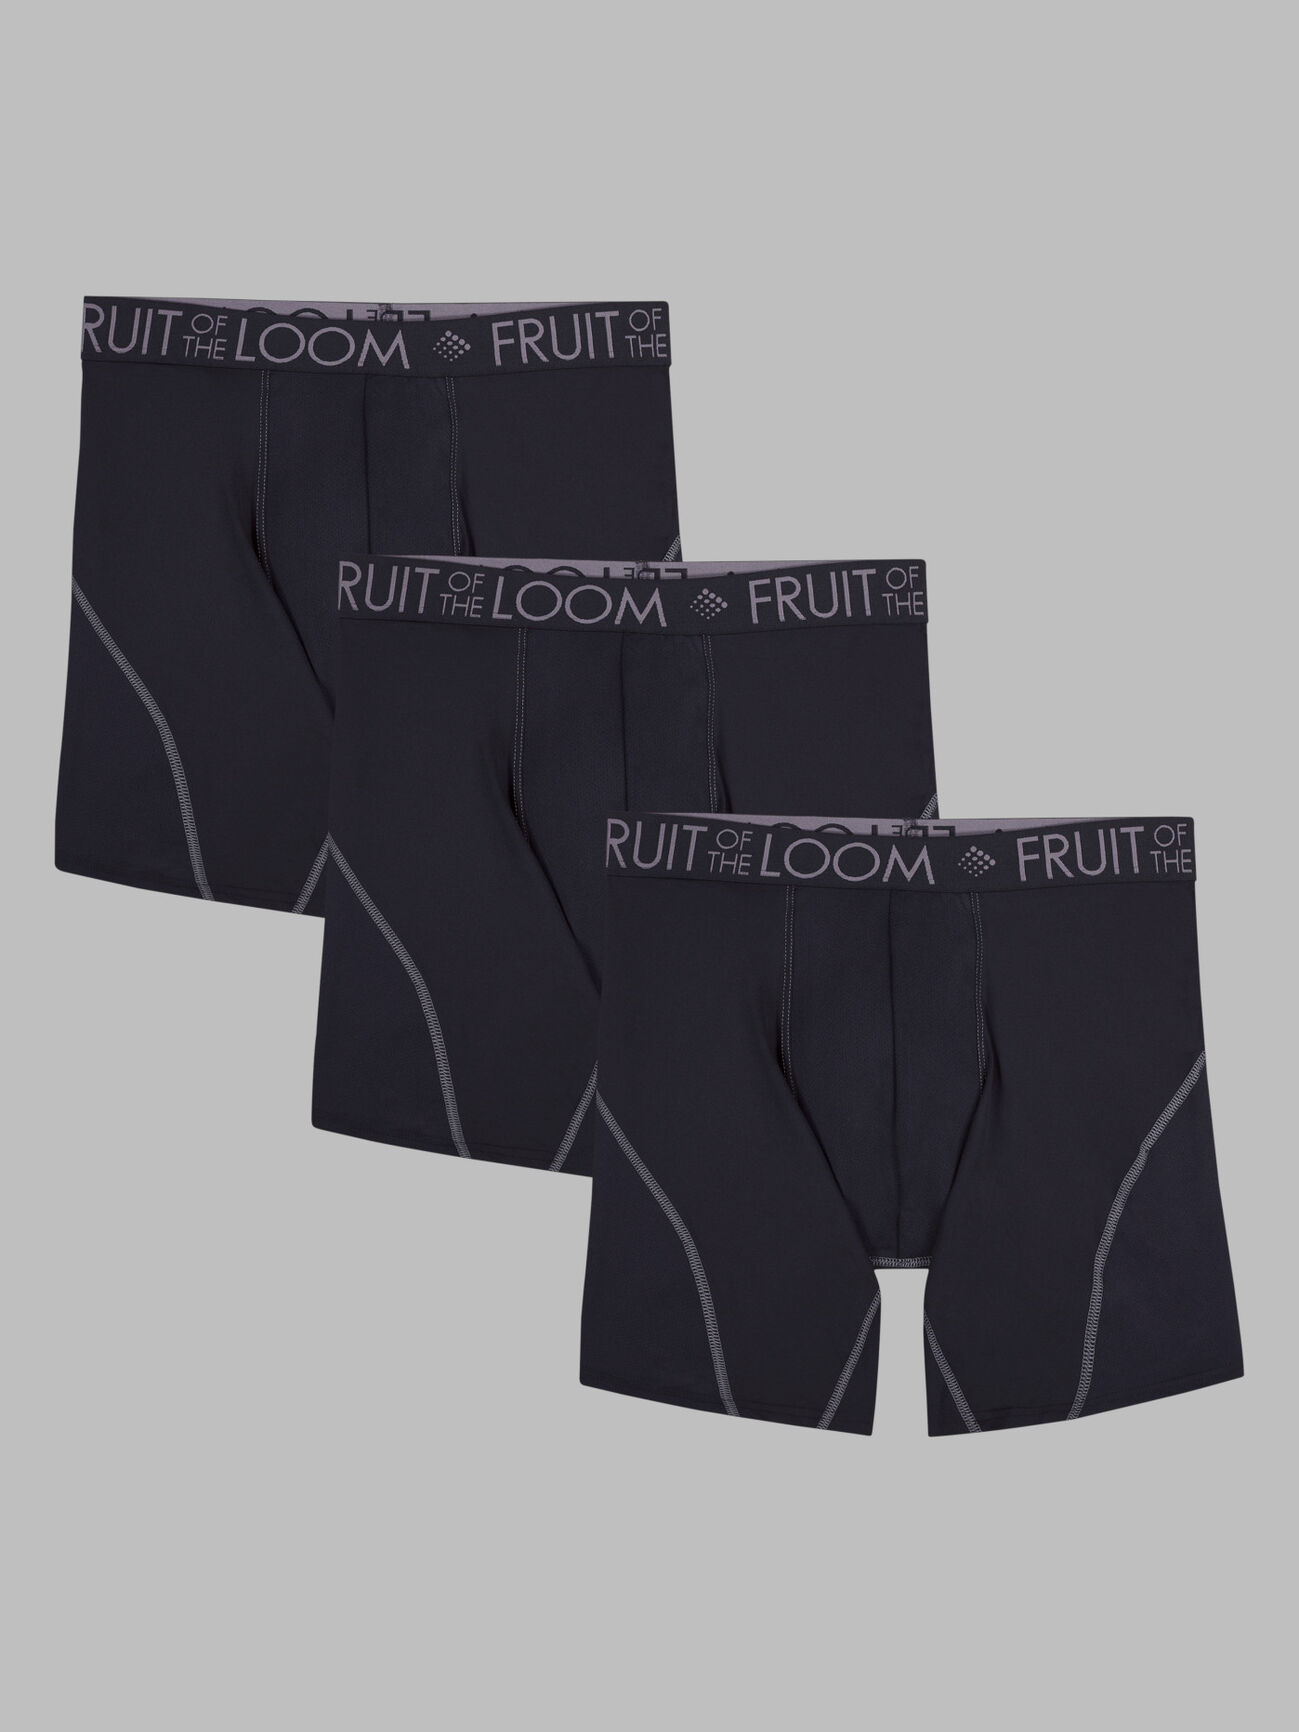 Fruit of the Loom Men's Breathable Boxer Brief Assorted Colors